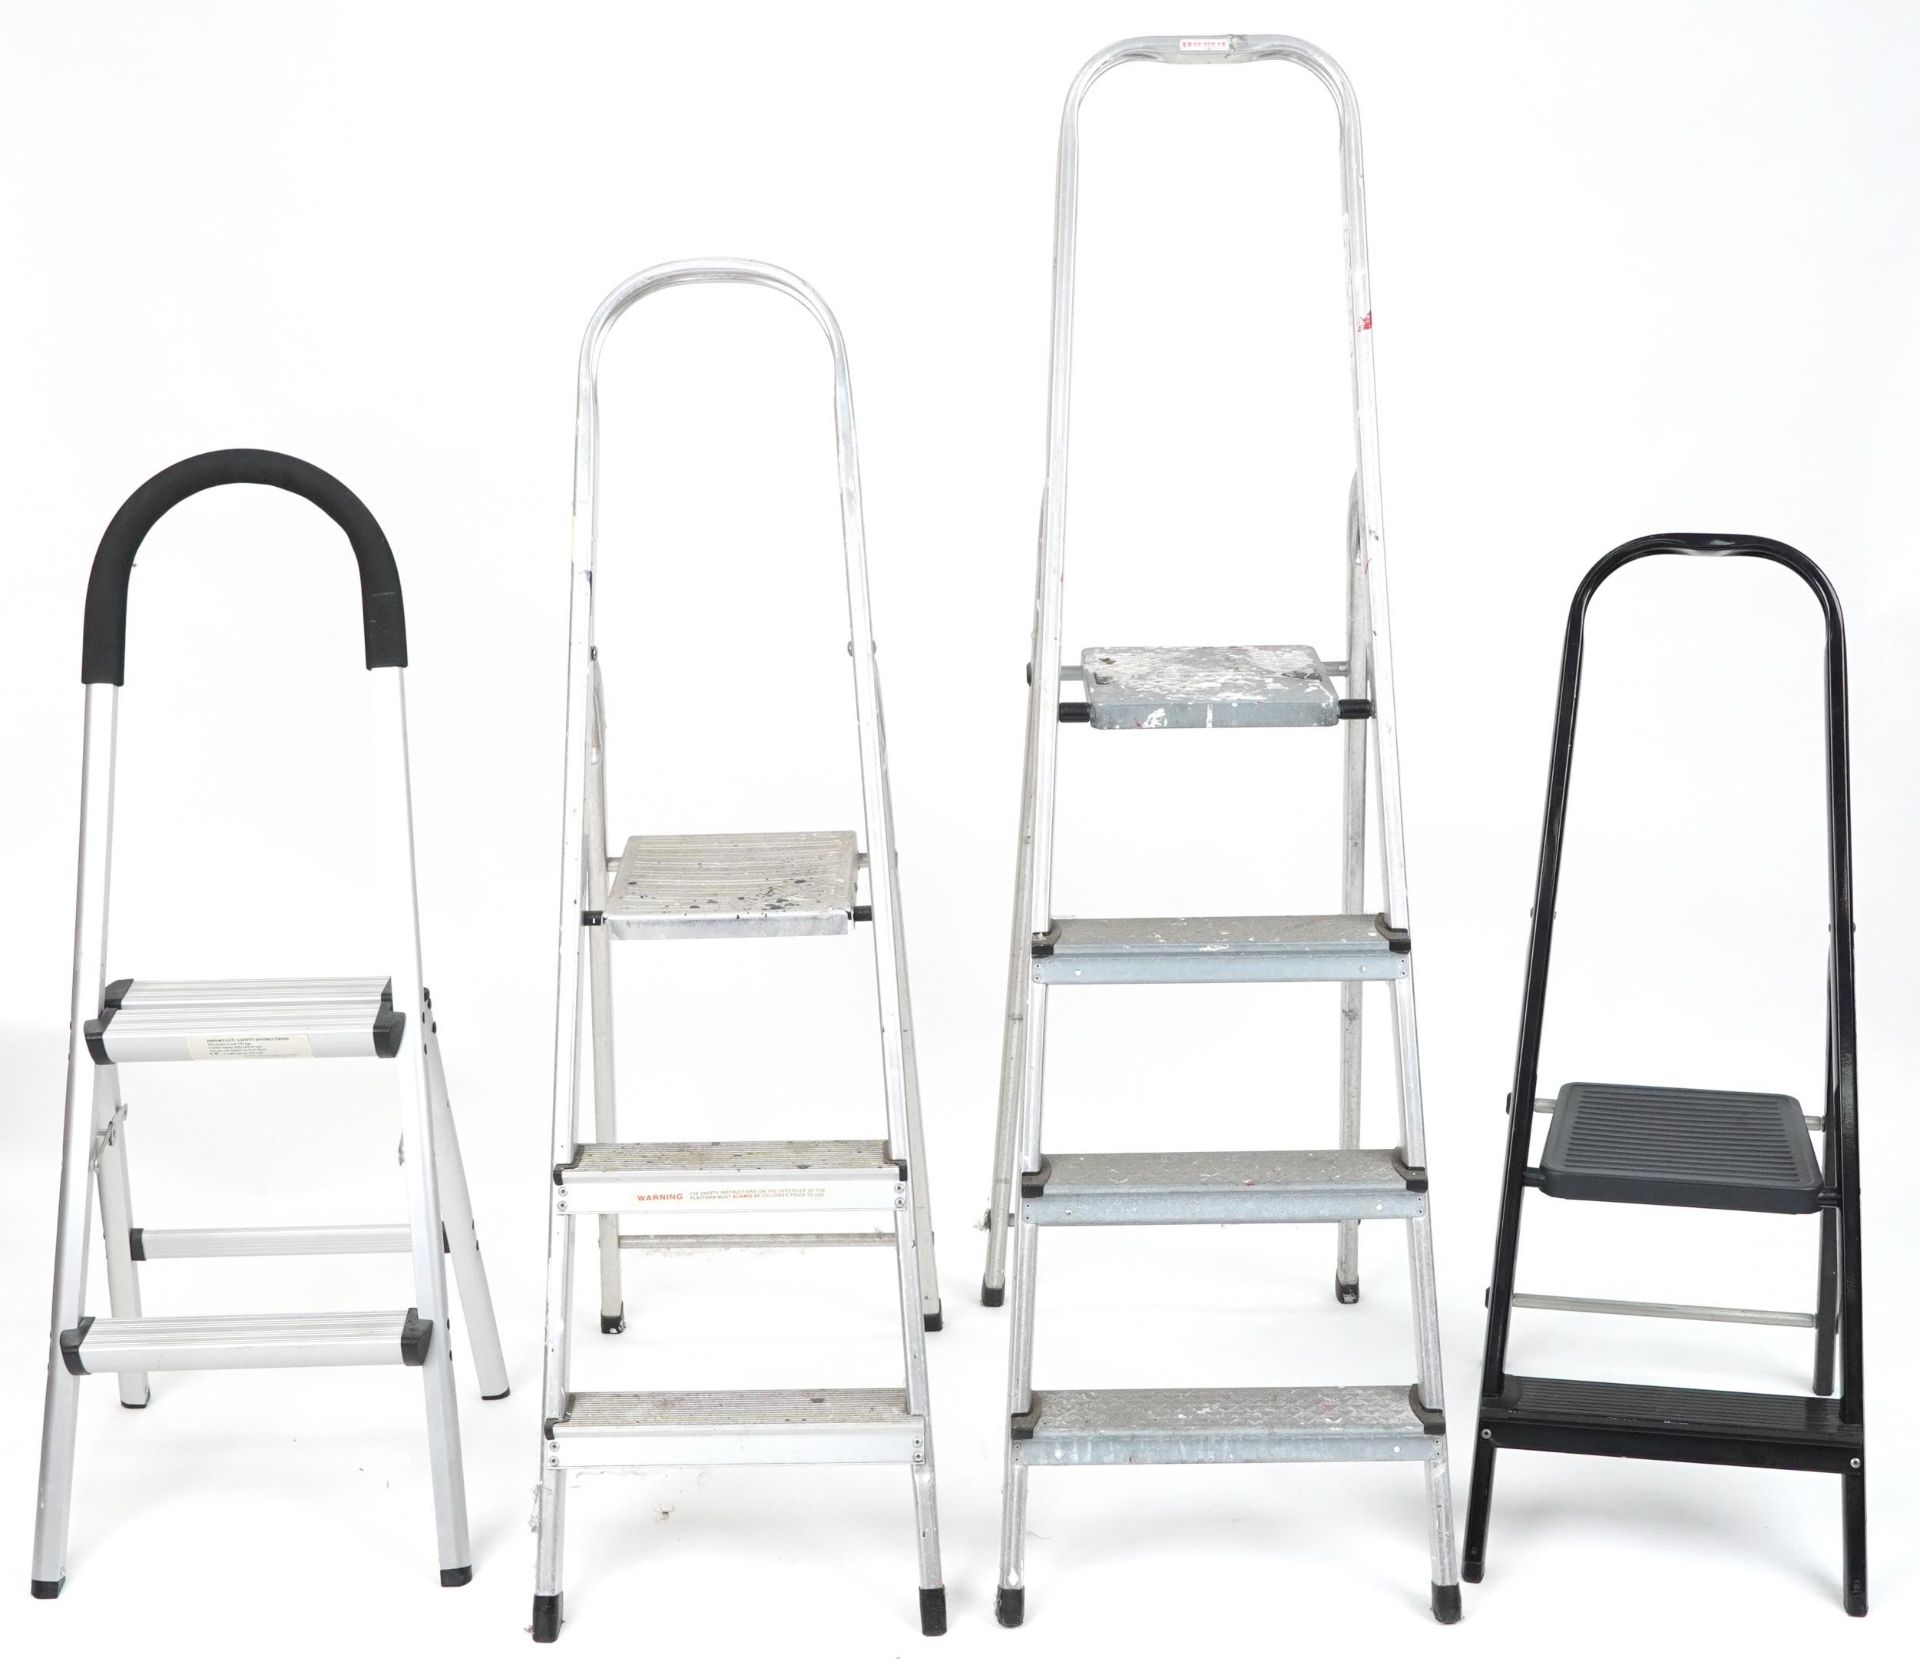 Four aluminium folding stepladders including Leifheit and Clima, the largest 160cm high when closed